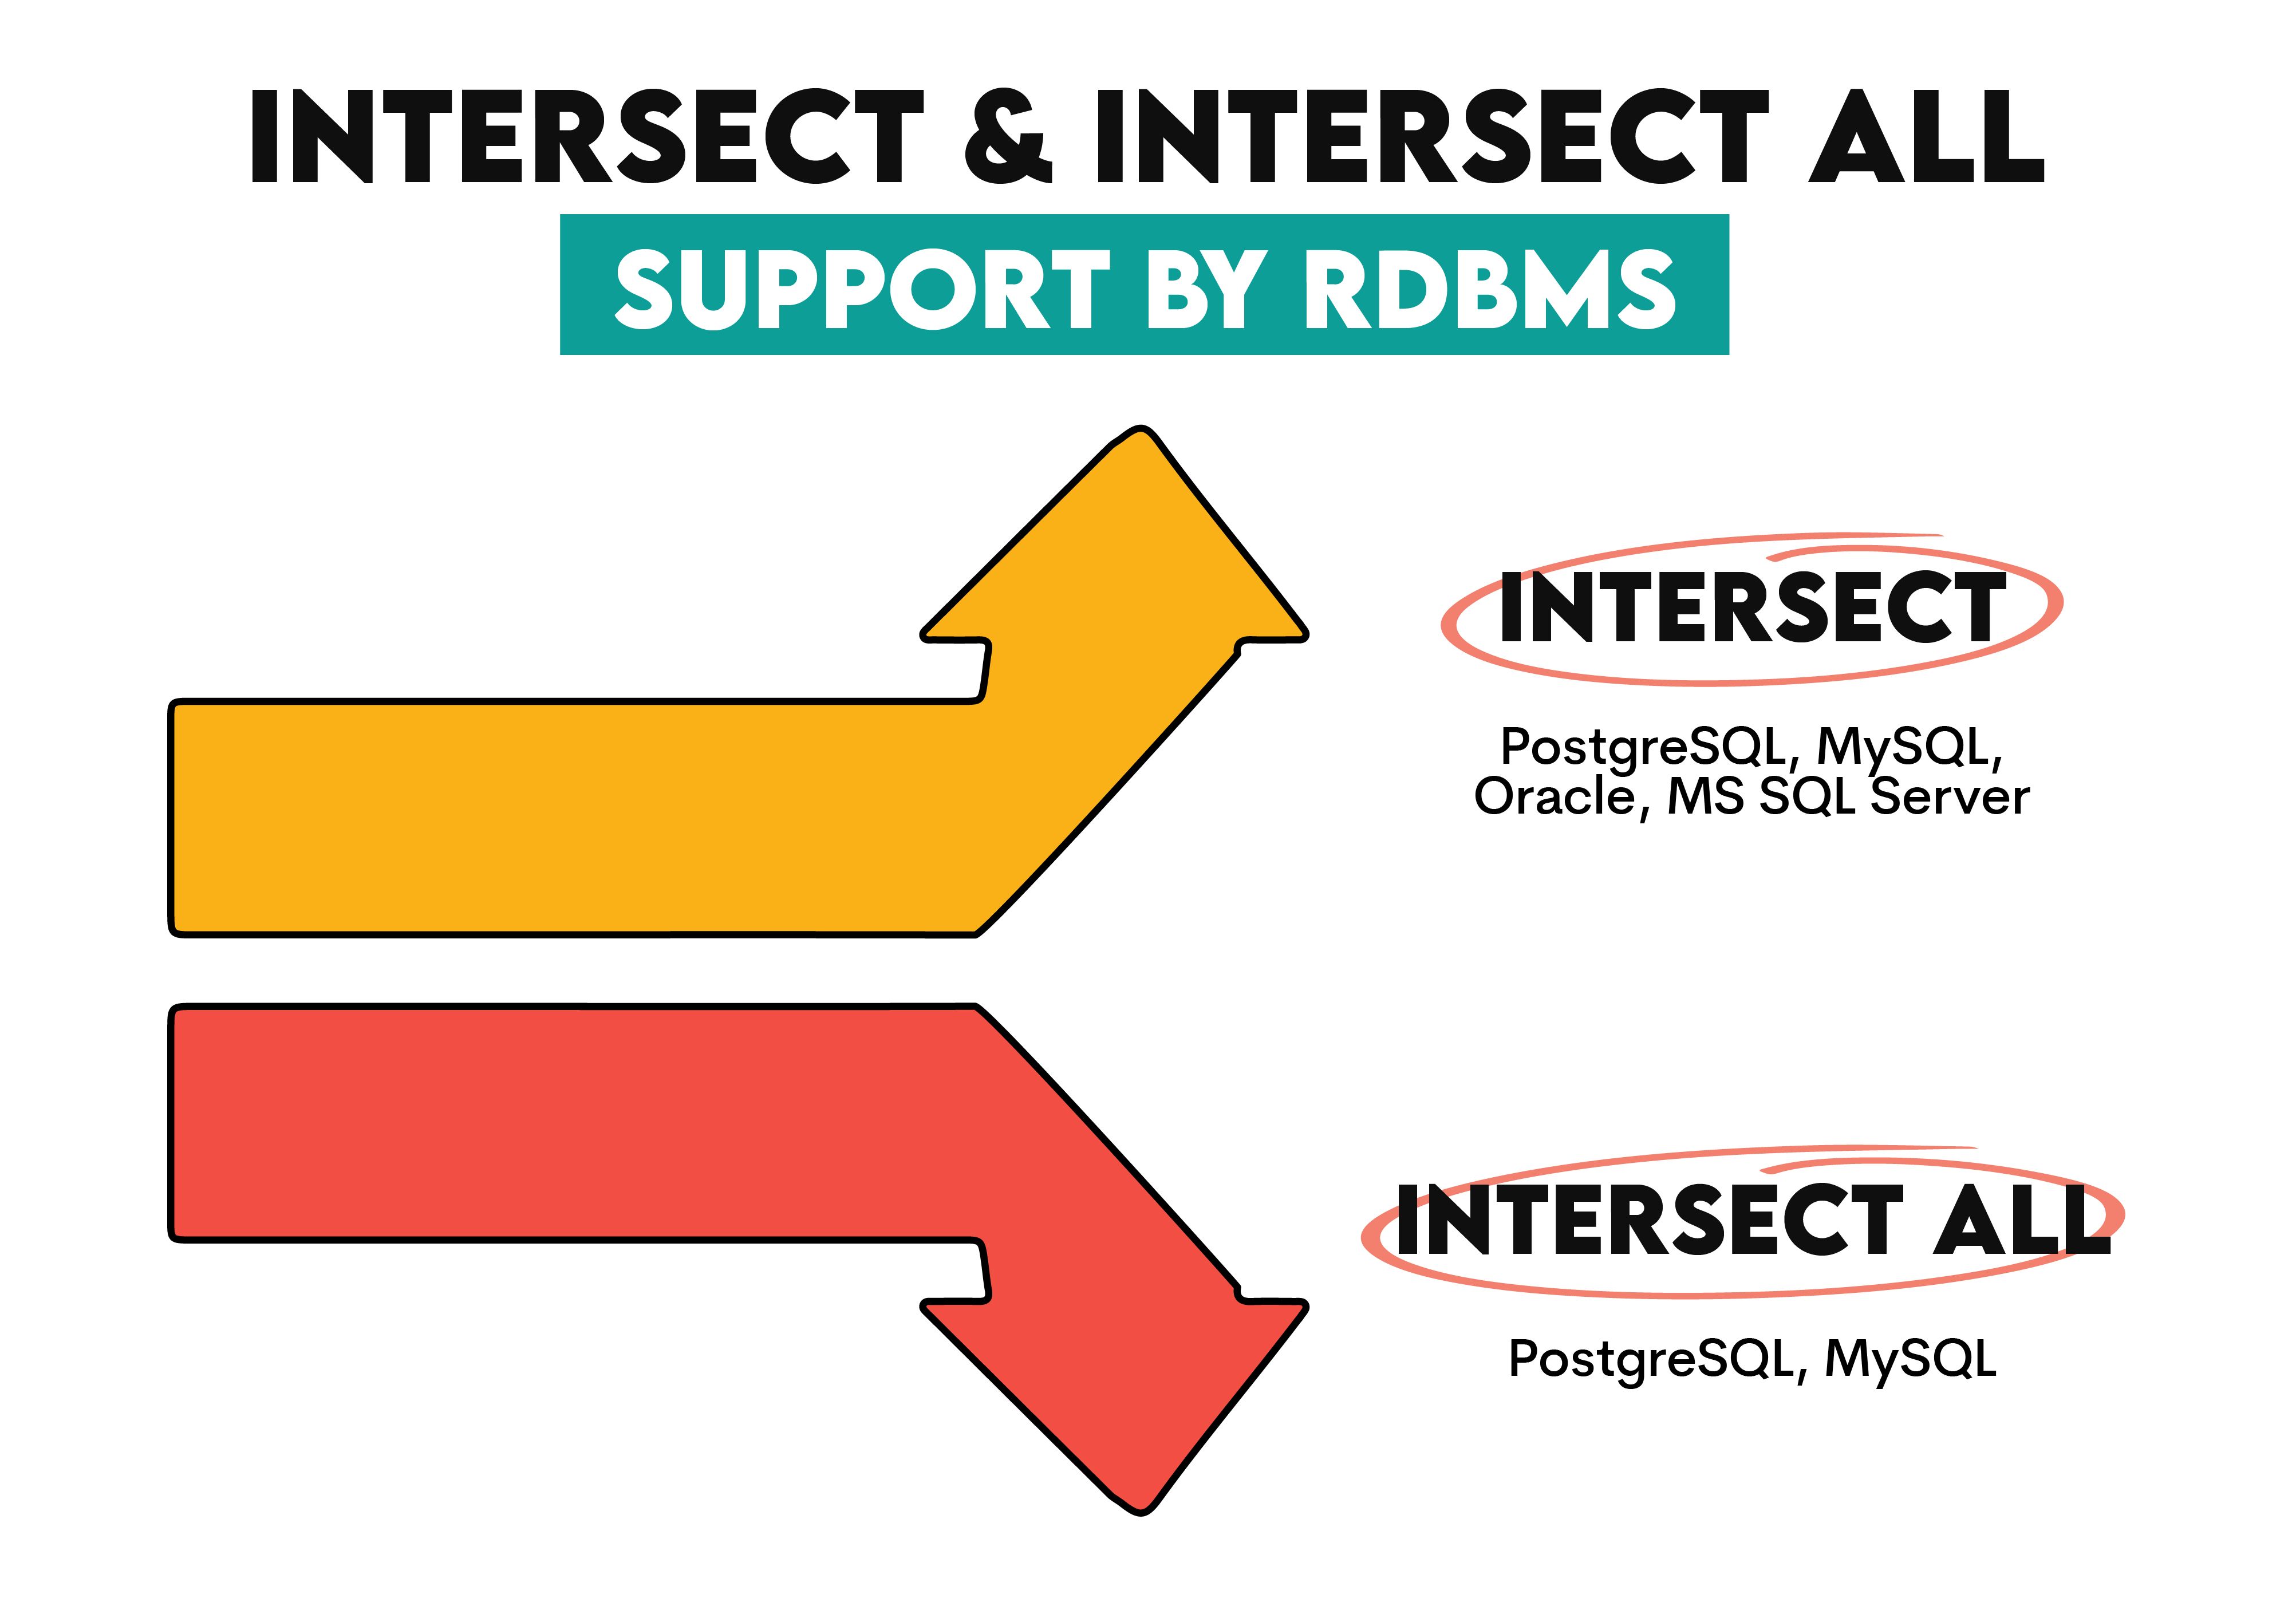 How intersect is implemented across SQL